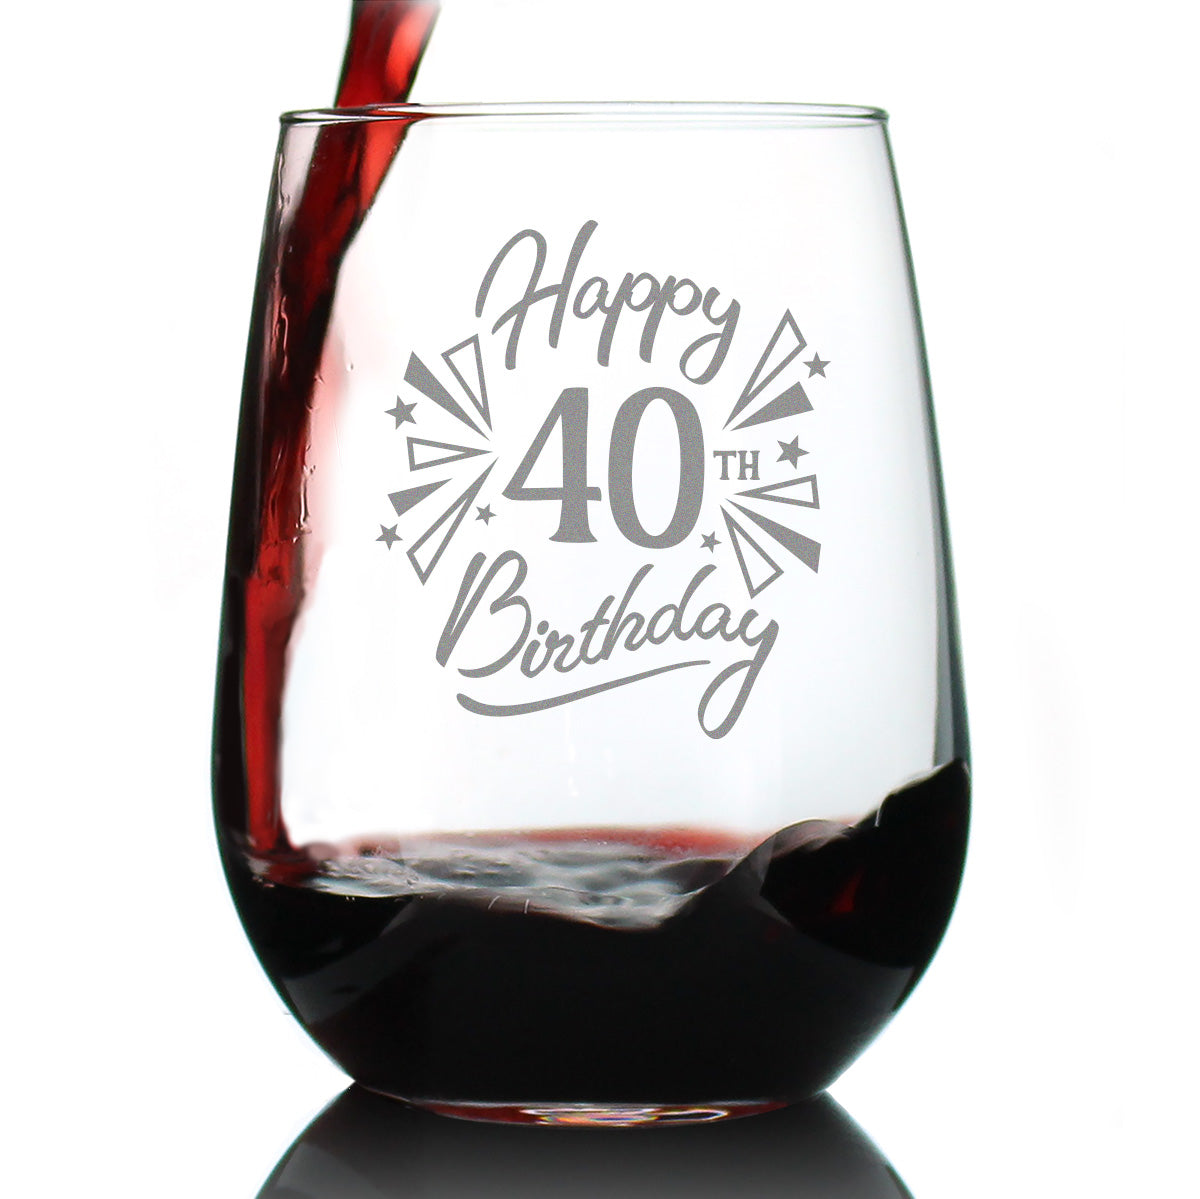 Happy 40th Birthday - Stemless Wine Glass Gifts for Women &amp; Men Turning 40 - Bday Party Decor - Large Glasses 17 Oz